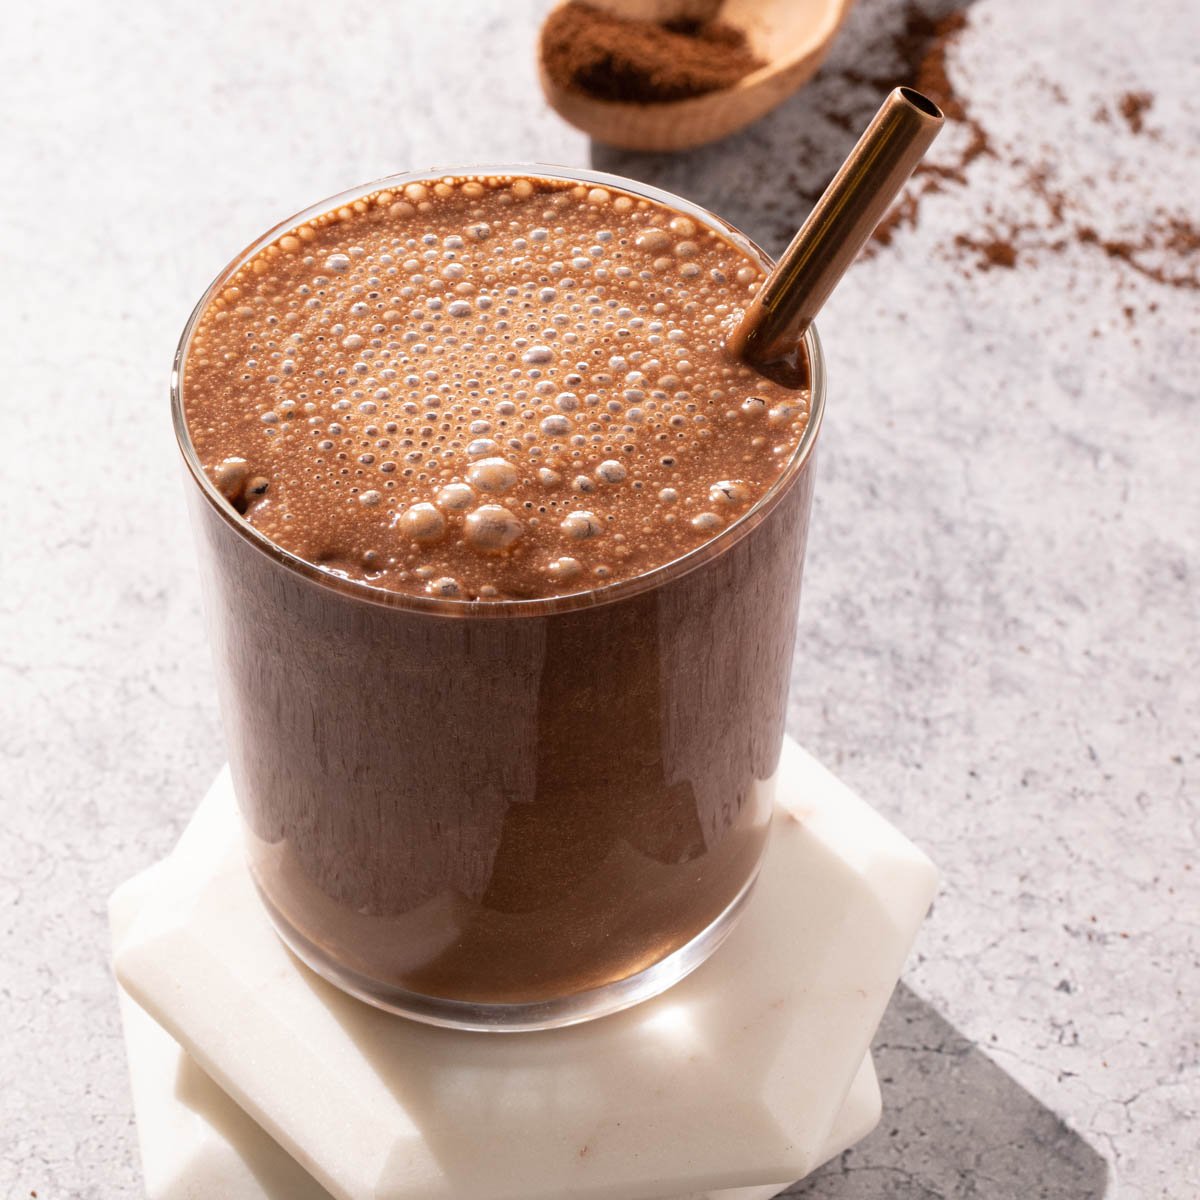 https://www.bessiebakes.com/wp-content/uploads/2021/07/Iced-Chocolate-Coffee-Smoothie-square-1.jpg